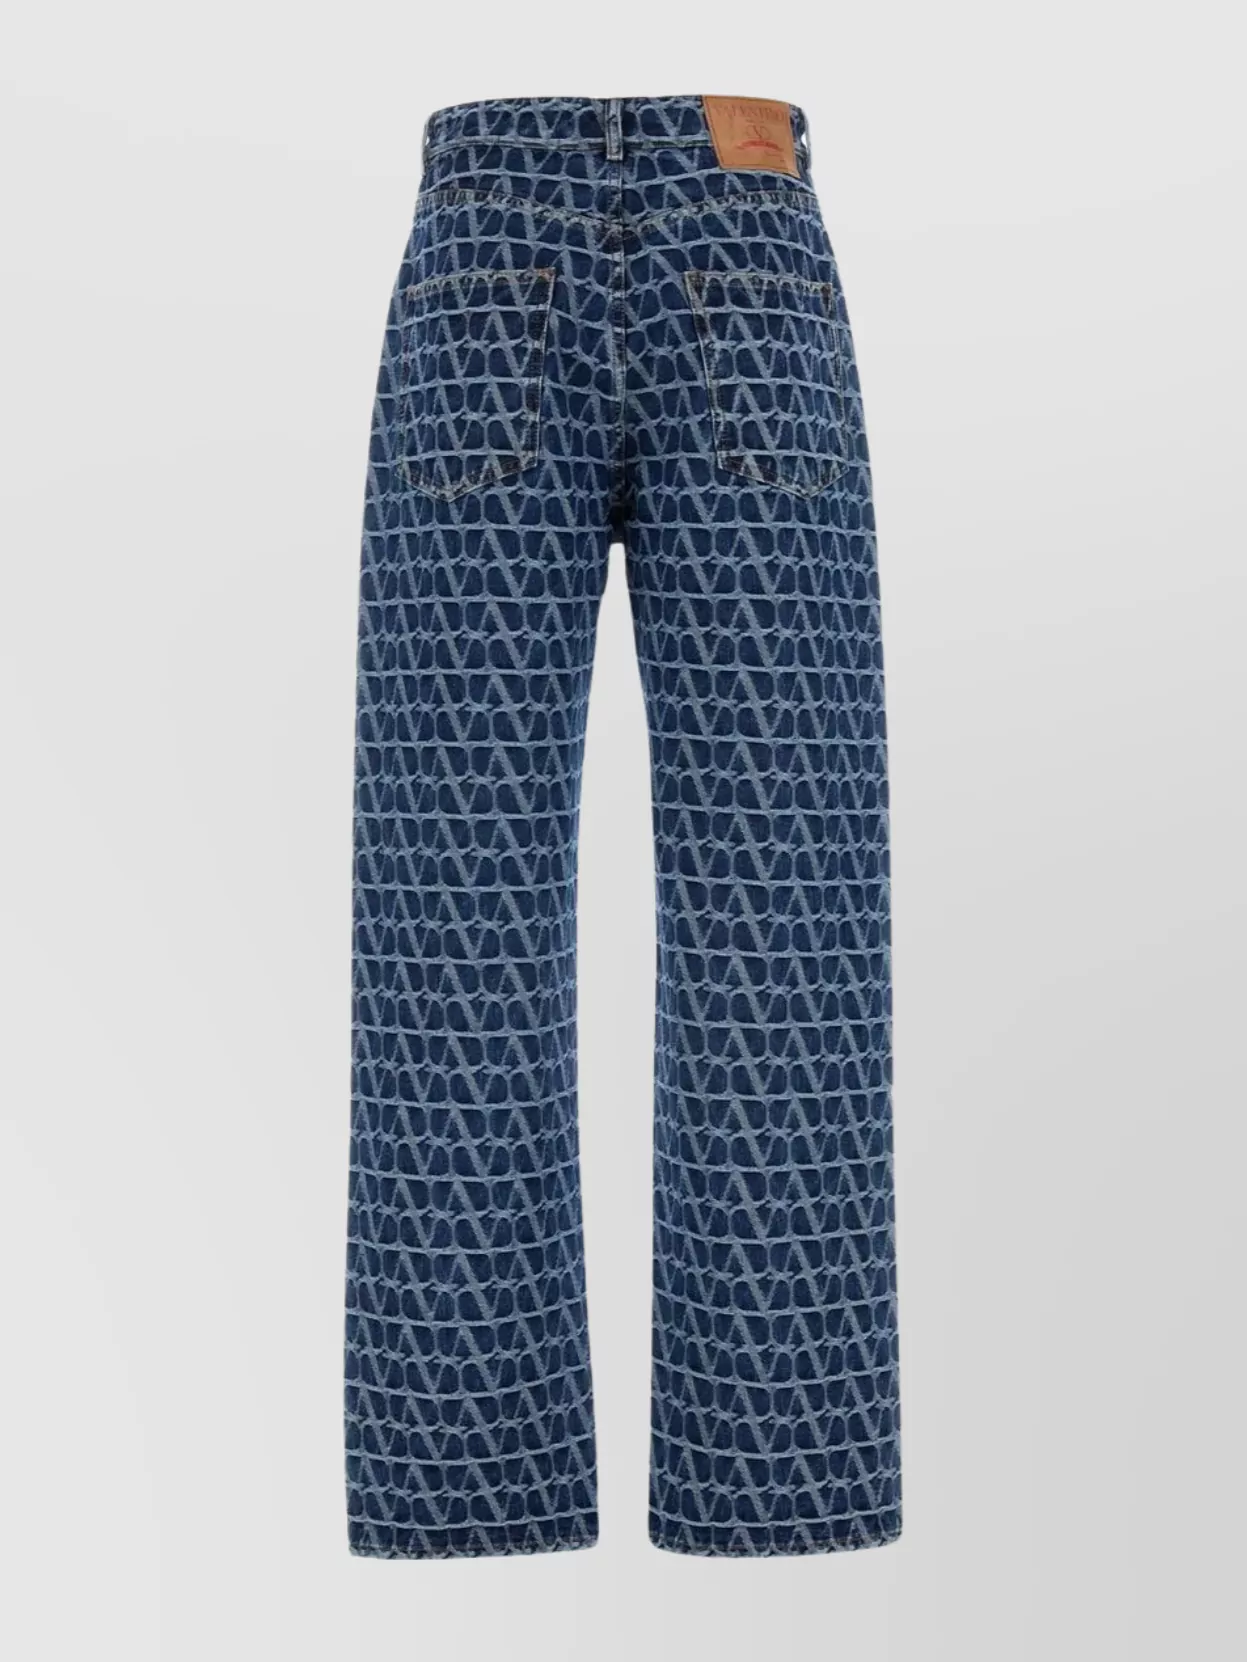 Shop Valentino Iconographe Canvas Jeans Featuring Printed Design